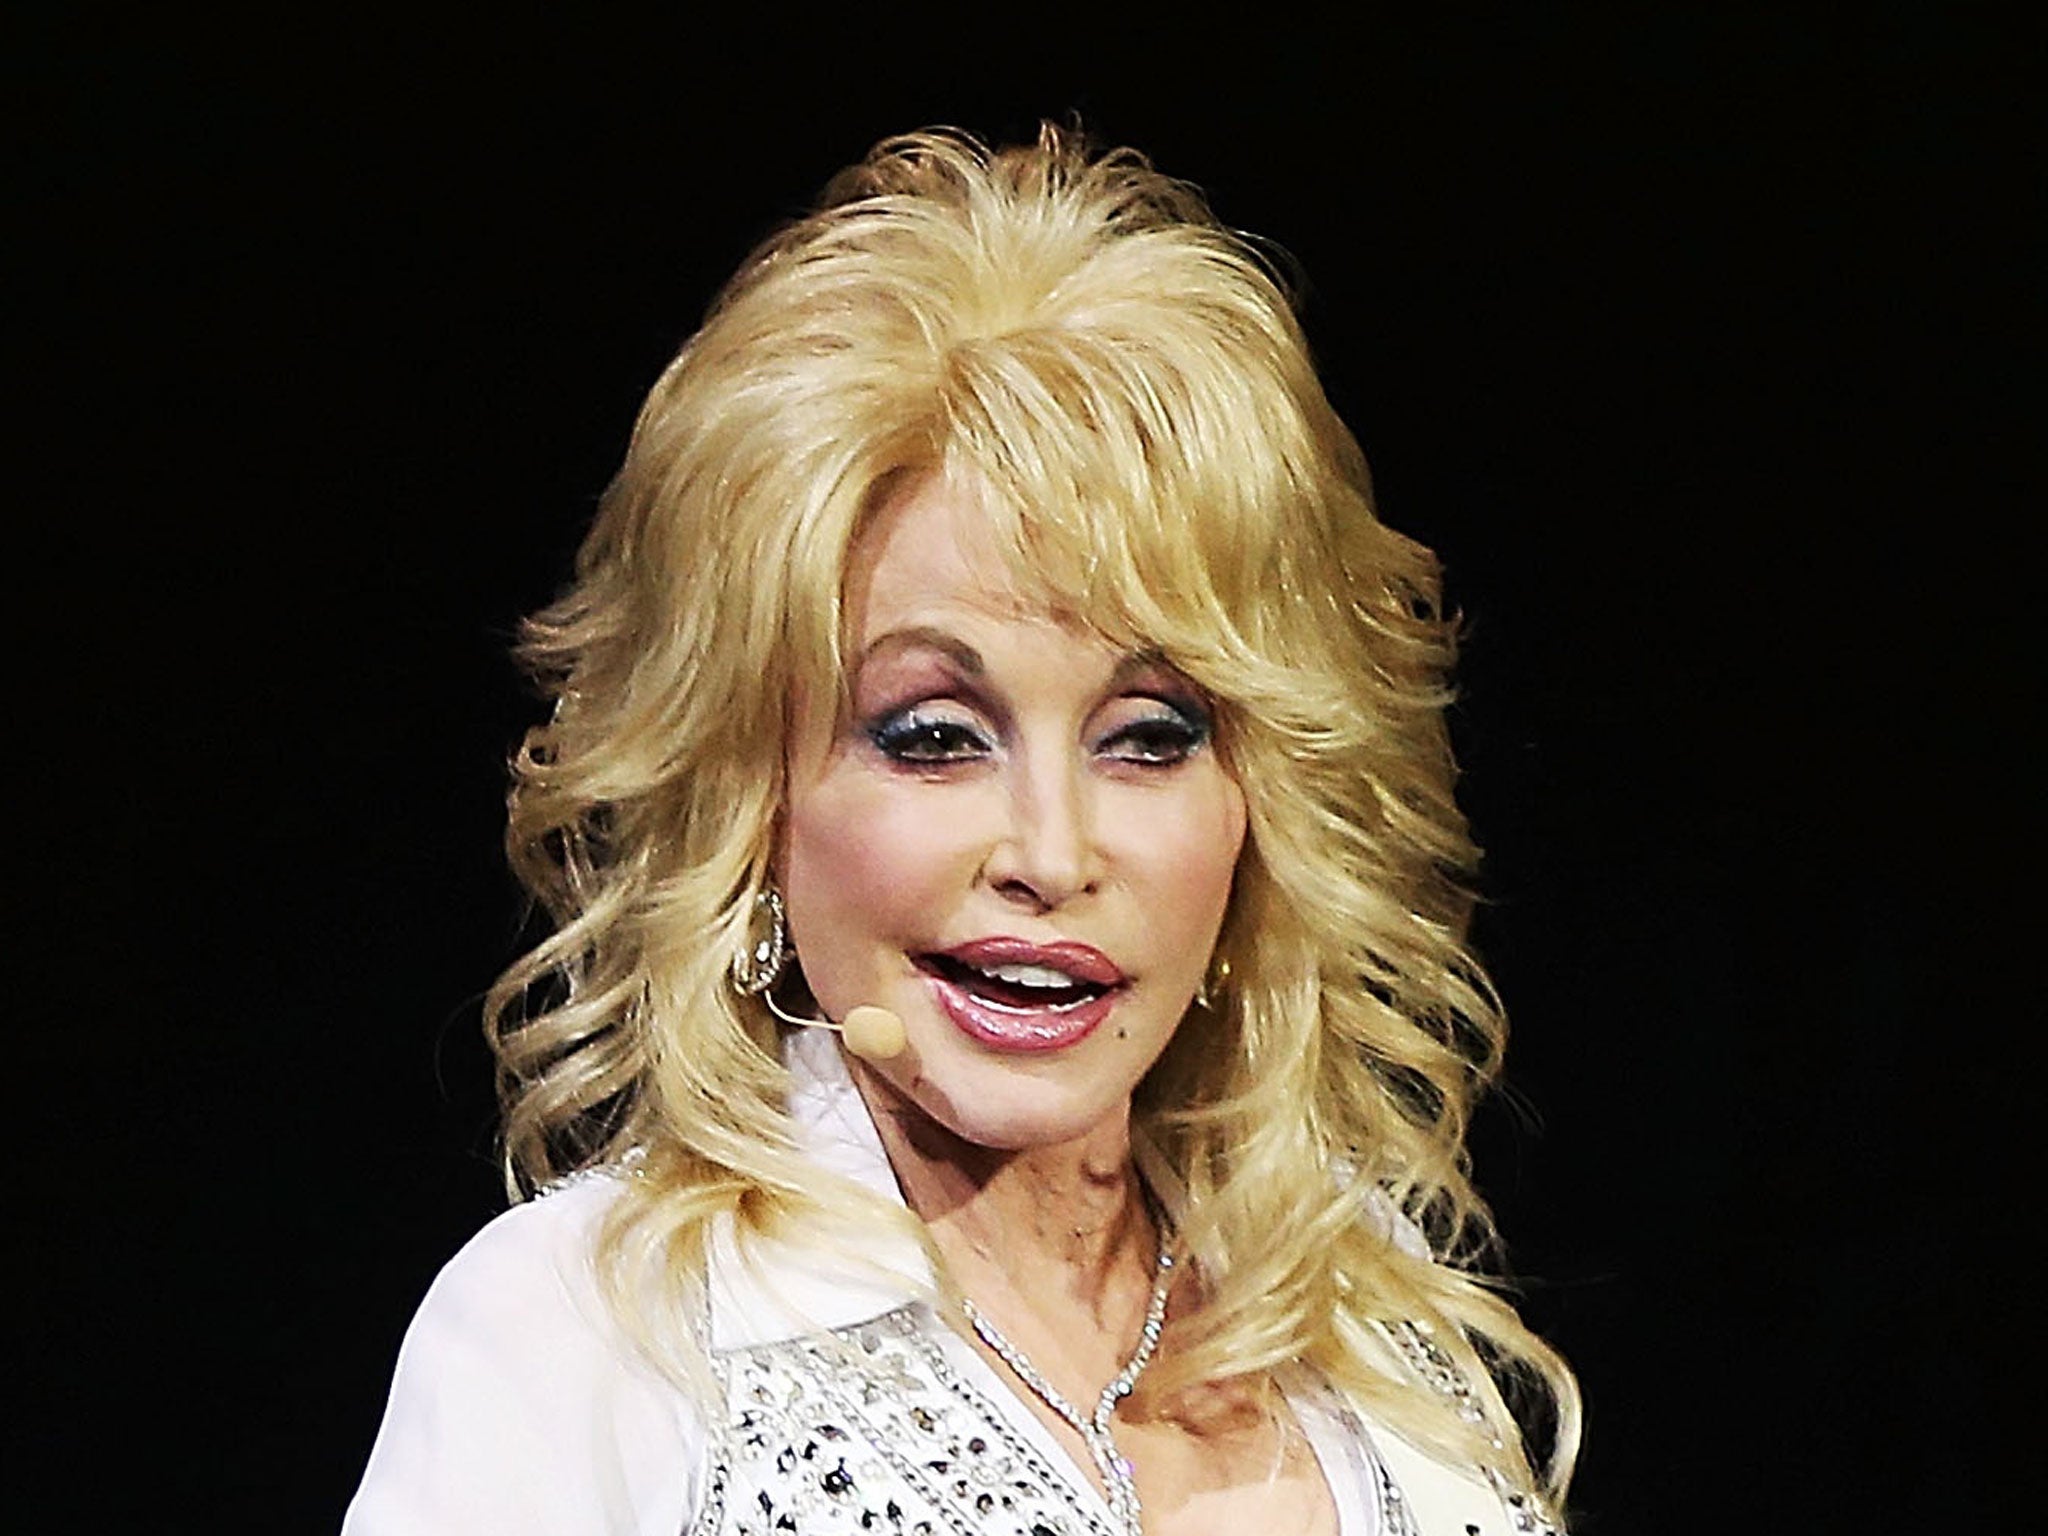 Dolly Parton, country singer